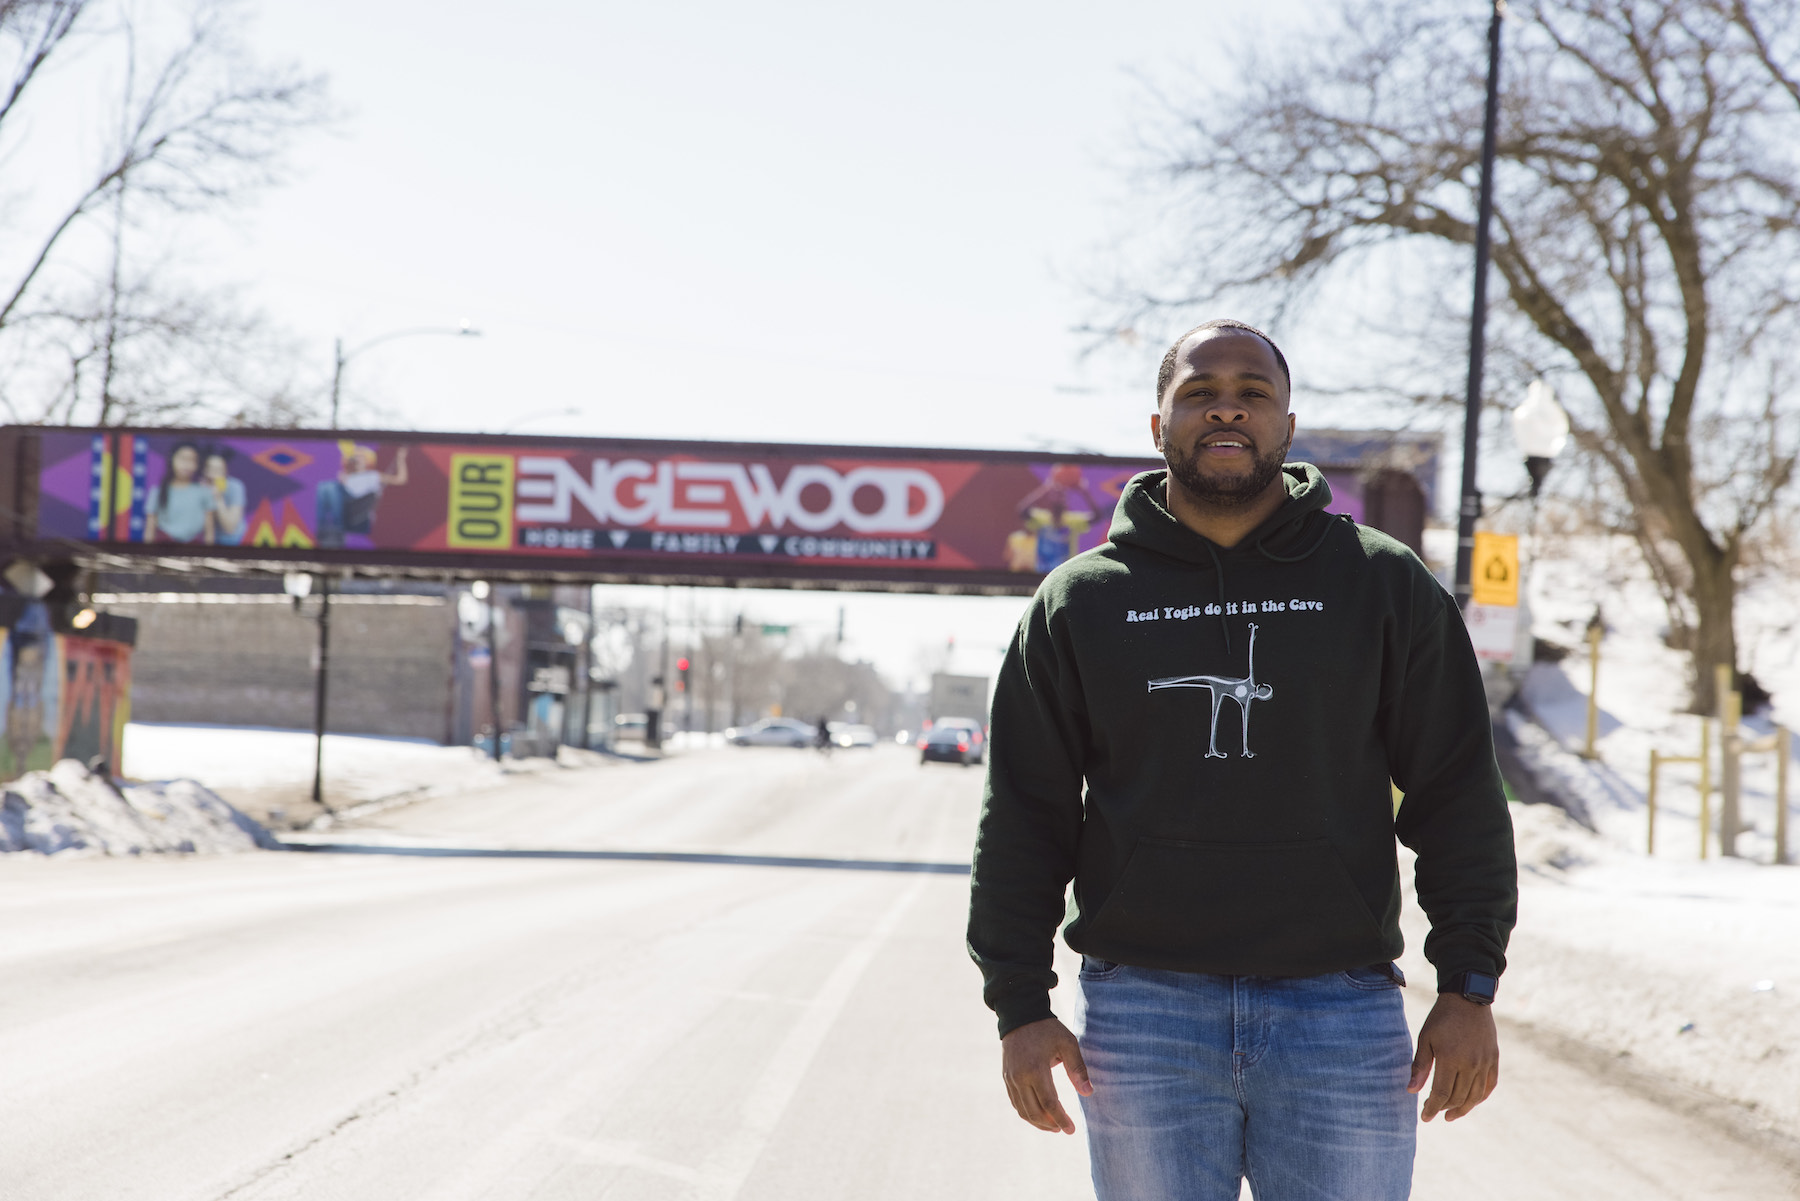 Community Changemaker Dion Dawson: Addressing Food Insecurity in Chicago